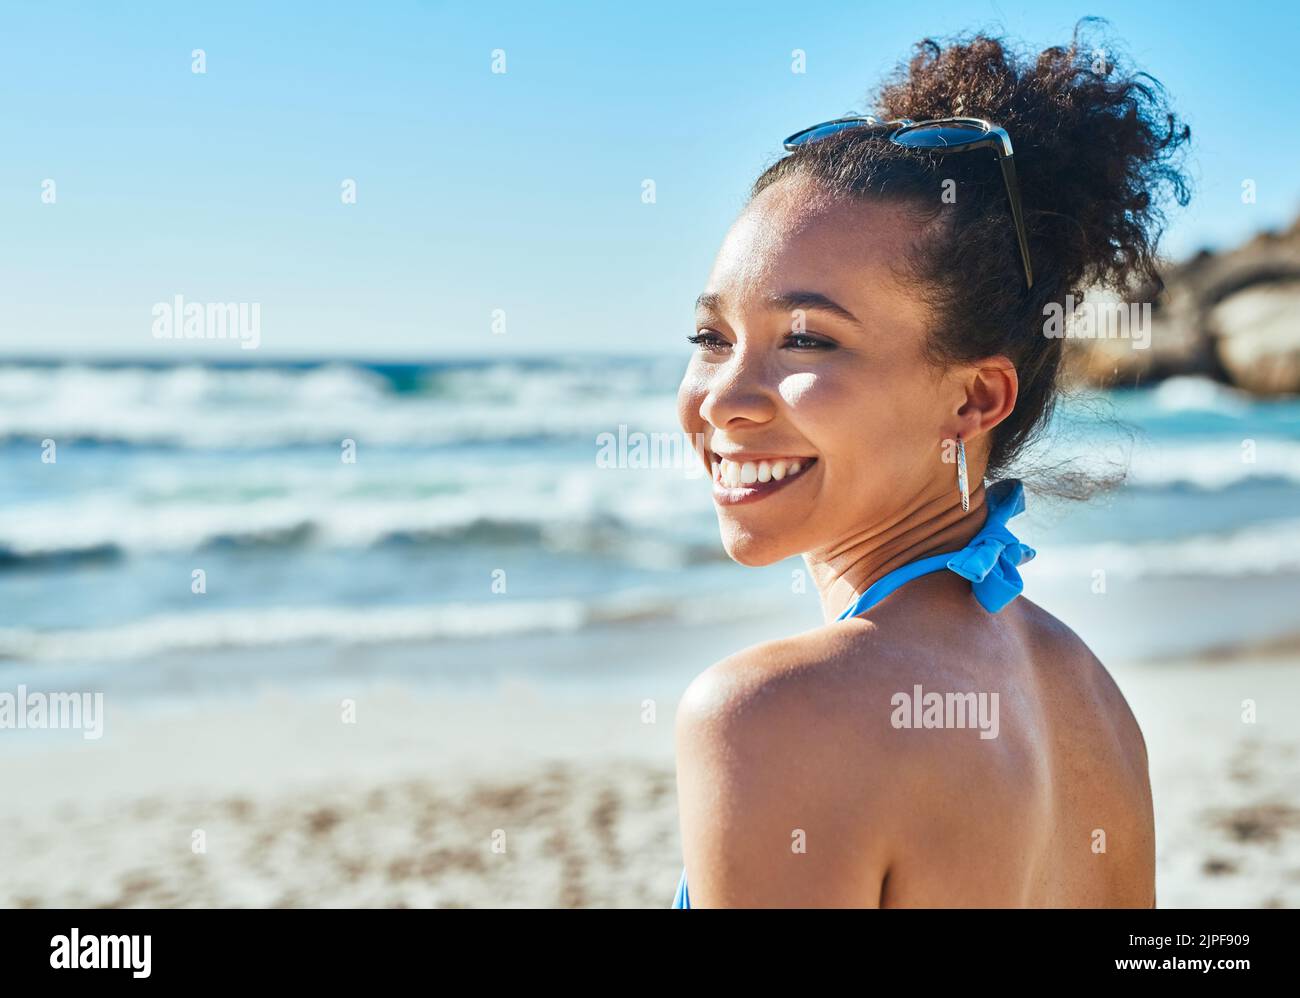 Beach days aka the best days. a beautiful young woman enjoying a summers day at the beach. Stock Photo